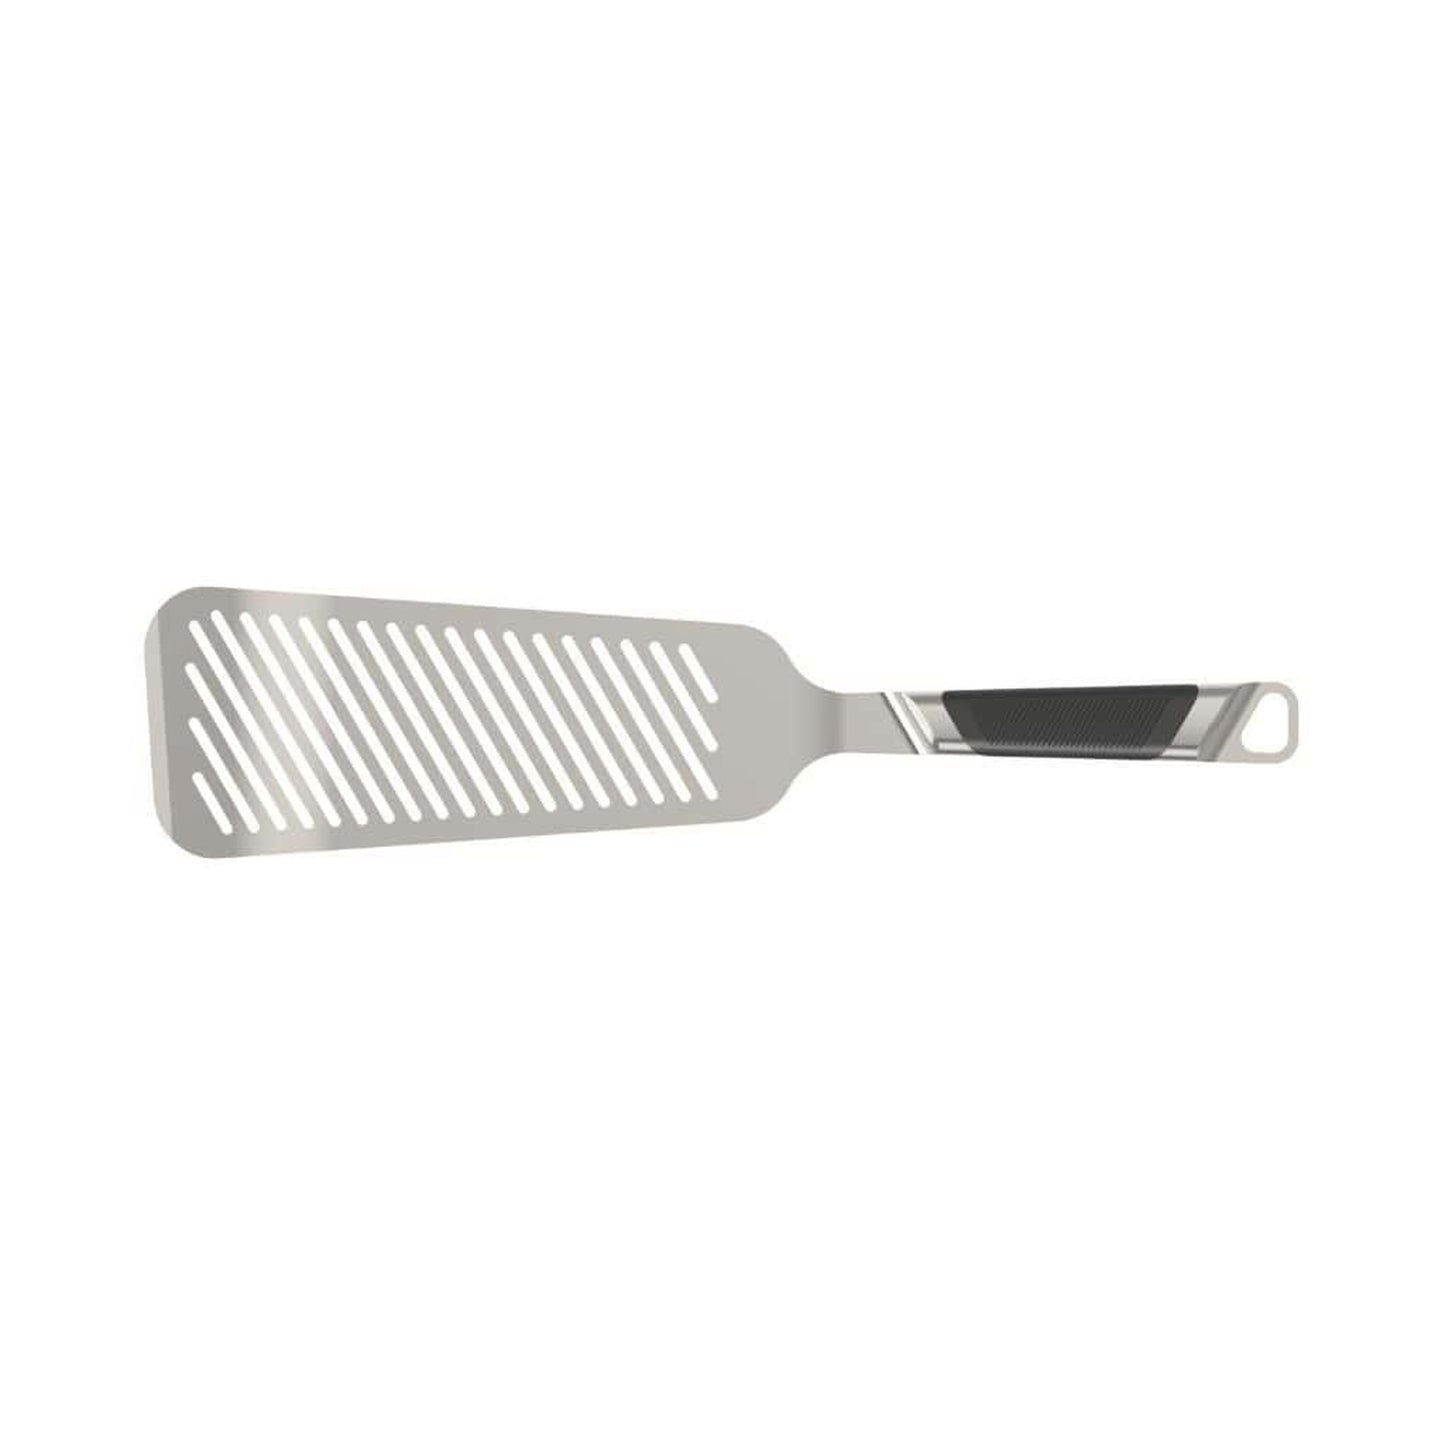 Everdure Large Premium Stainless Steel Fish Turner with Soft Grip